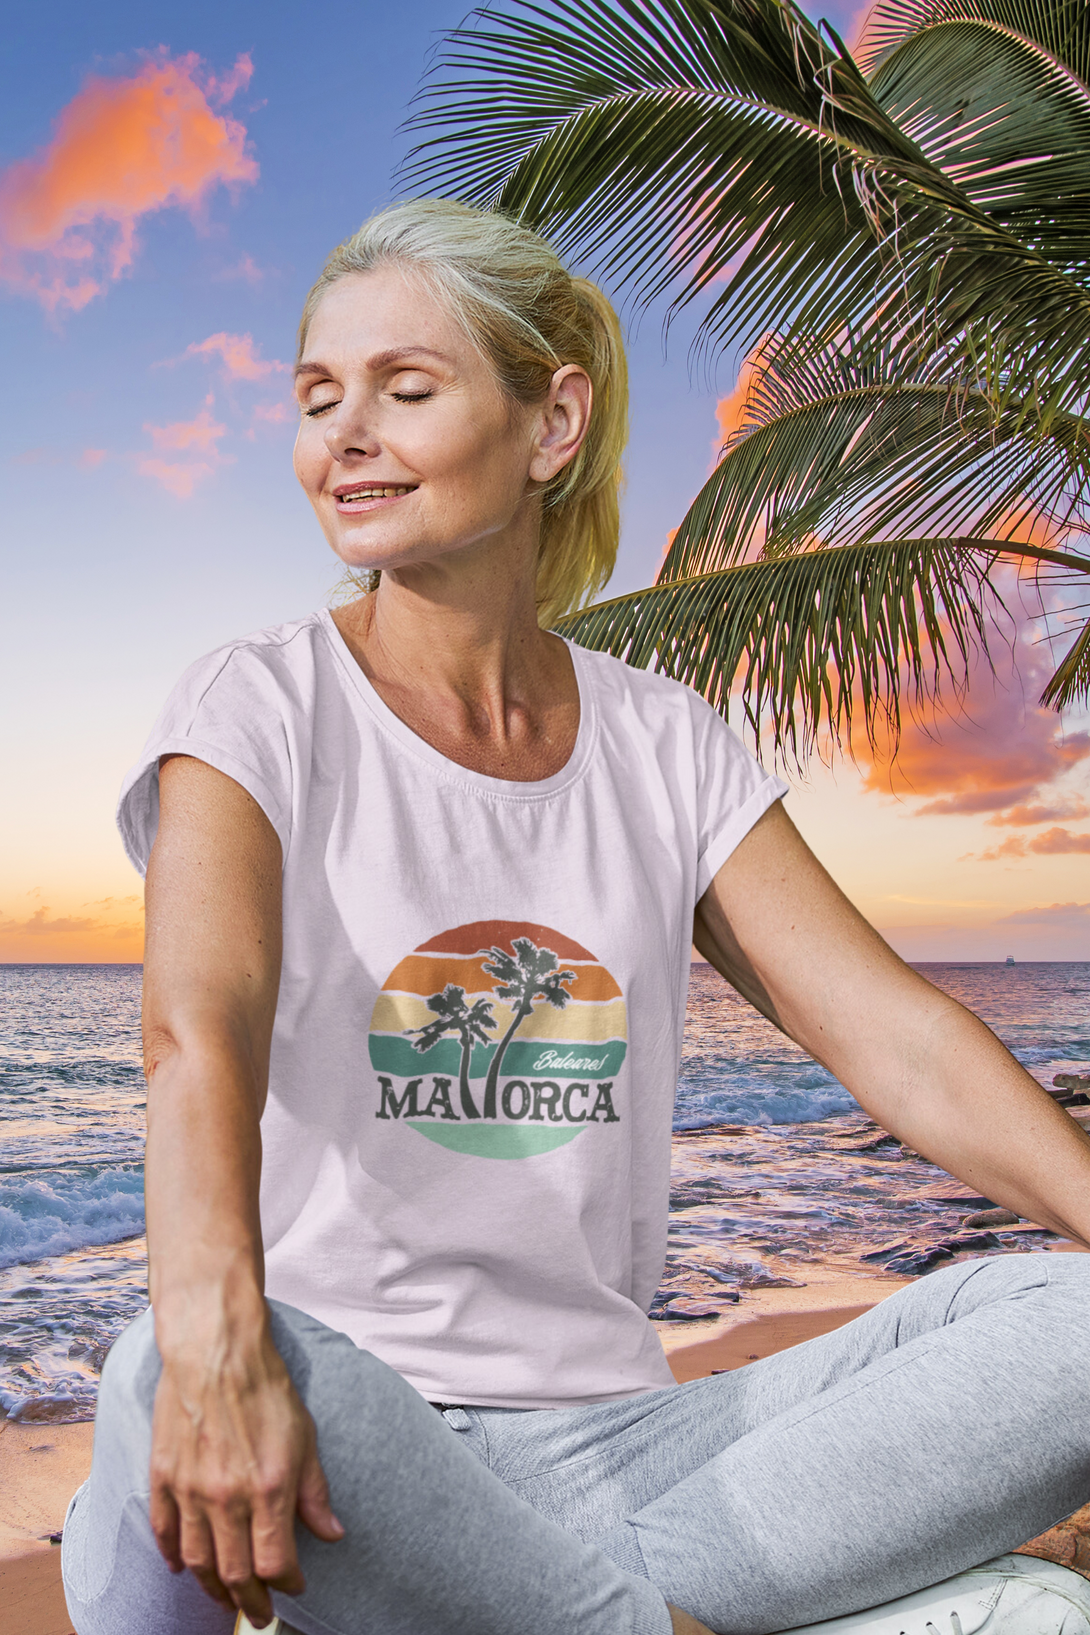 Mallorca And Palm Printed Scoop Neck T-Shirt For Women - WowWaves - 5